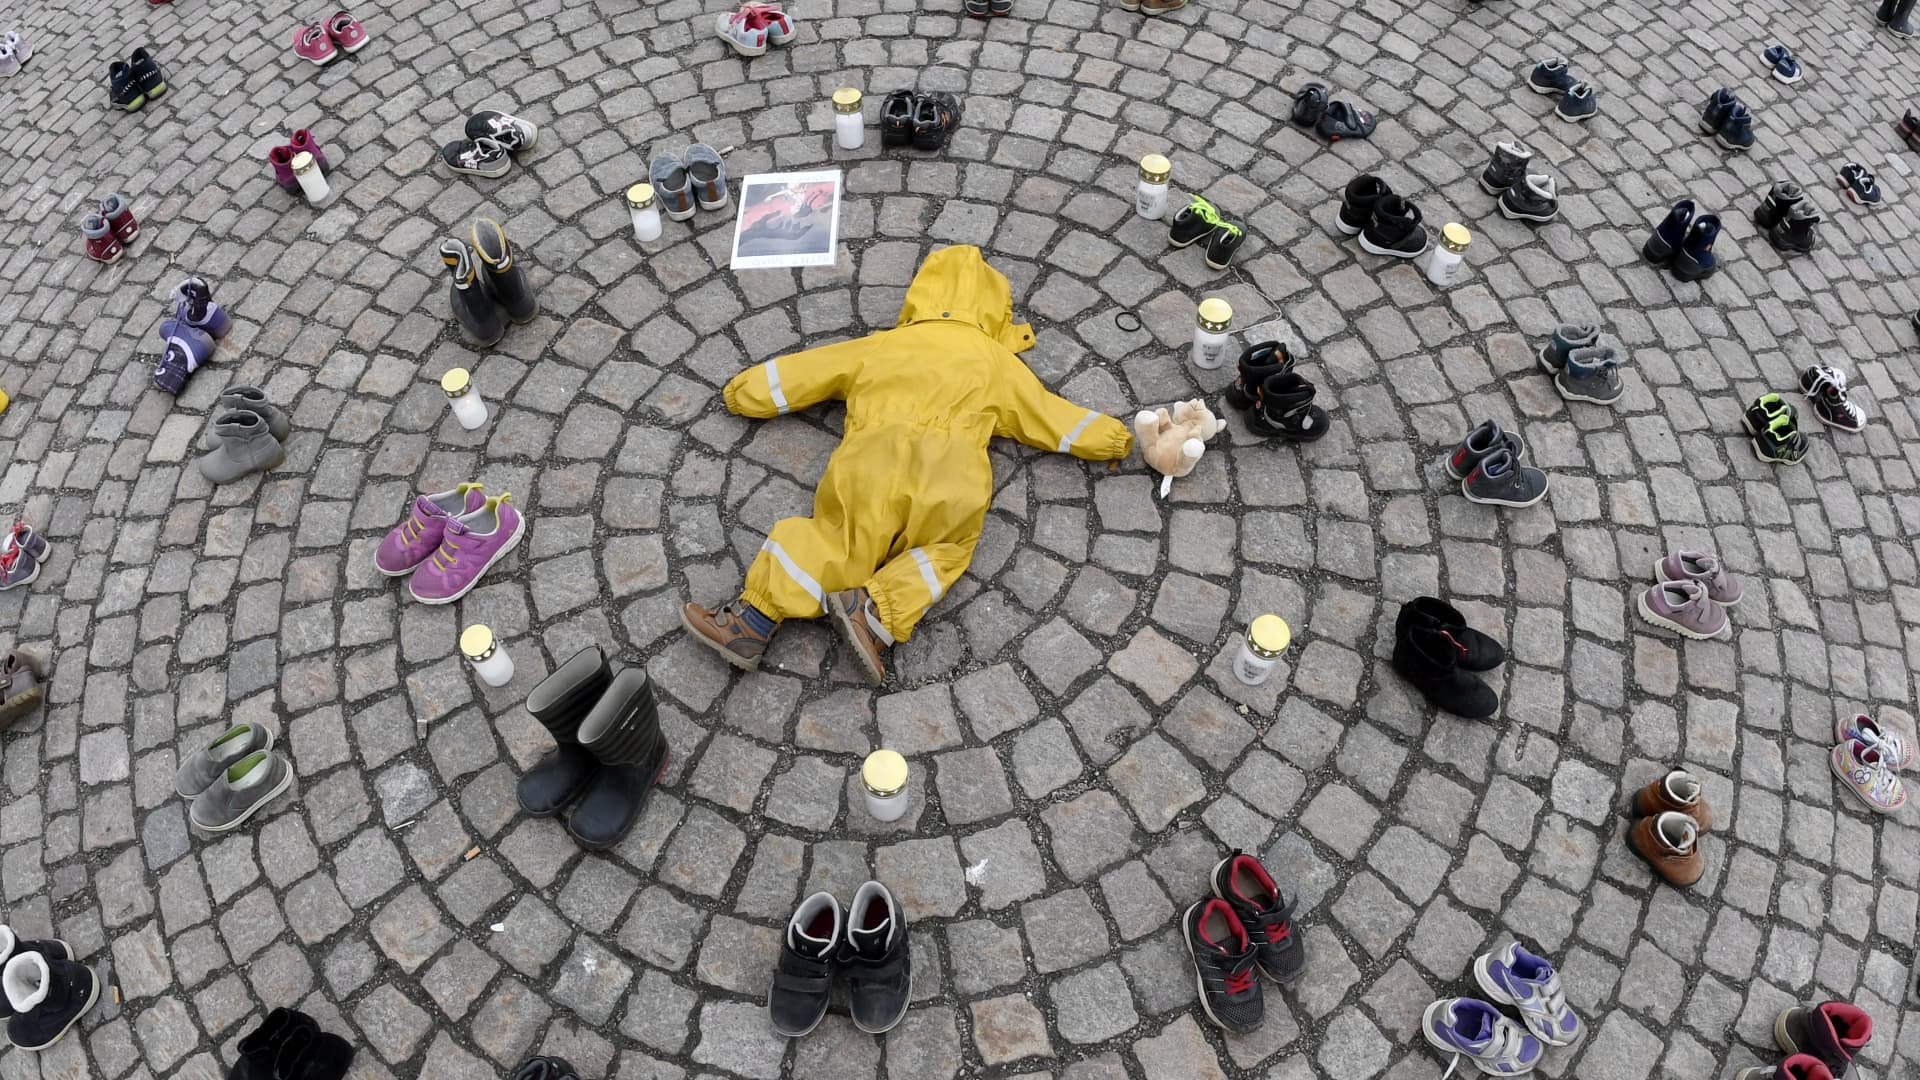 Candles, a children's clothing and shoes are seen during a demonstration organized by the Ukrainian Association in Finland, to honor the memory of the children killed in Mariupol, Ukraine, in Helsinki, on April 10, 2022.